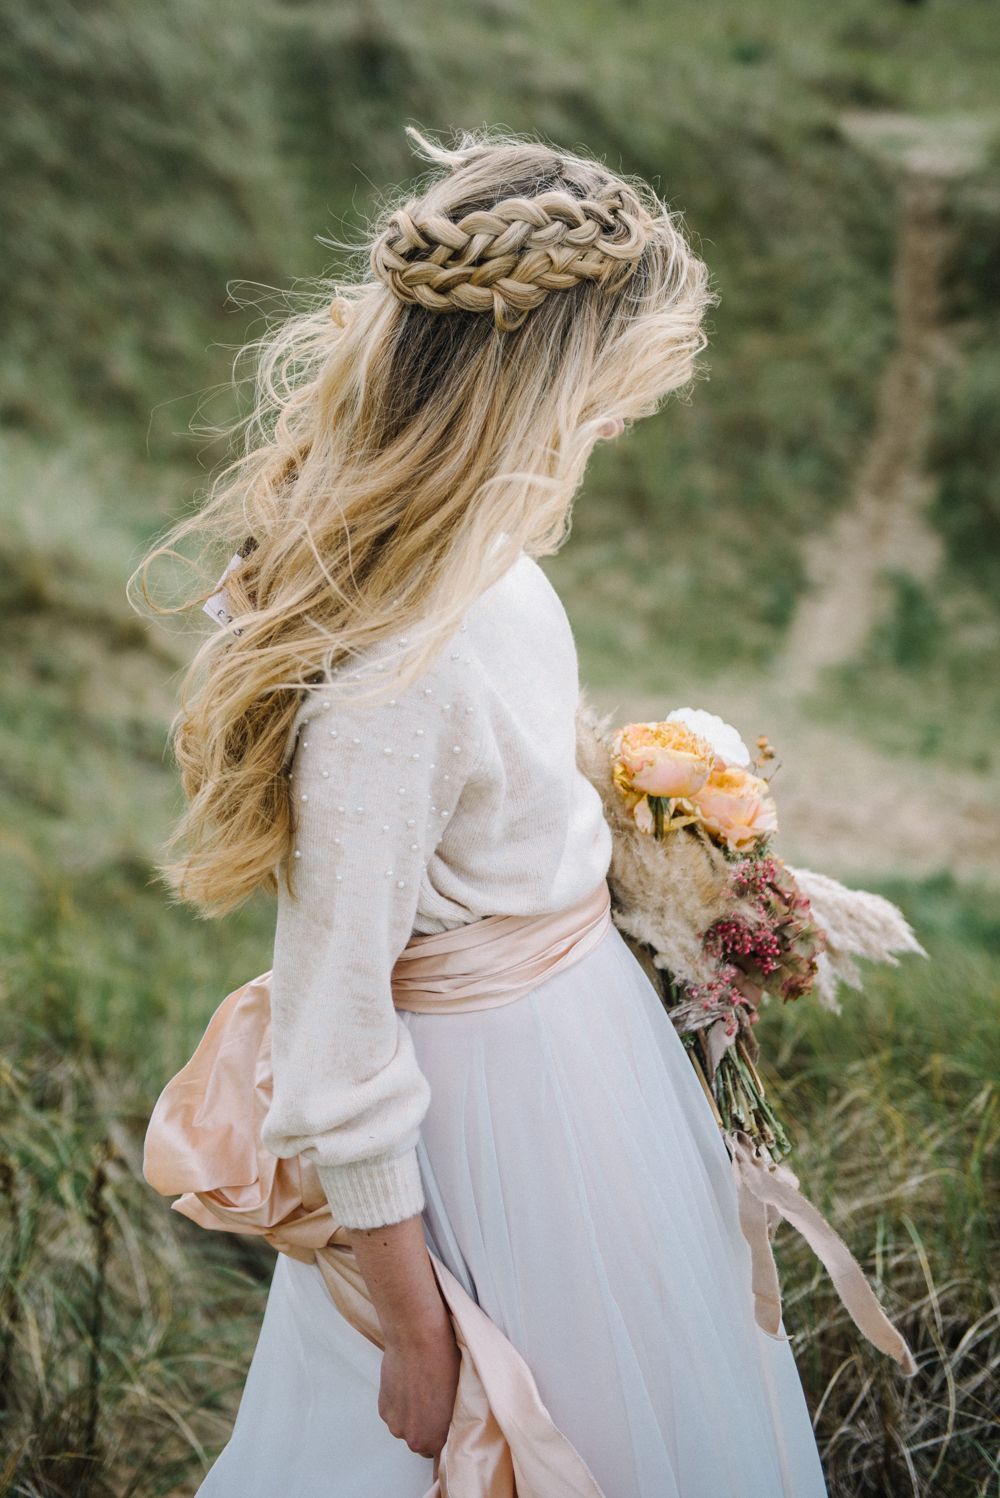 30 Stunning Wedding Hairstyles With Flowers In 2021